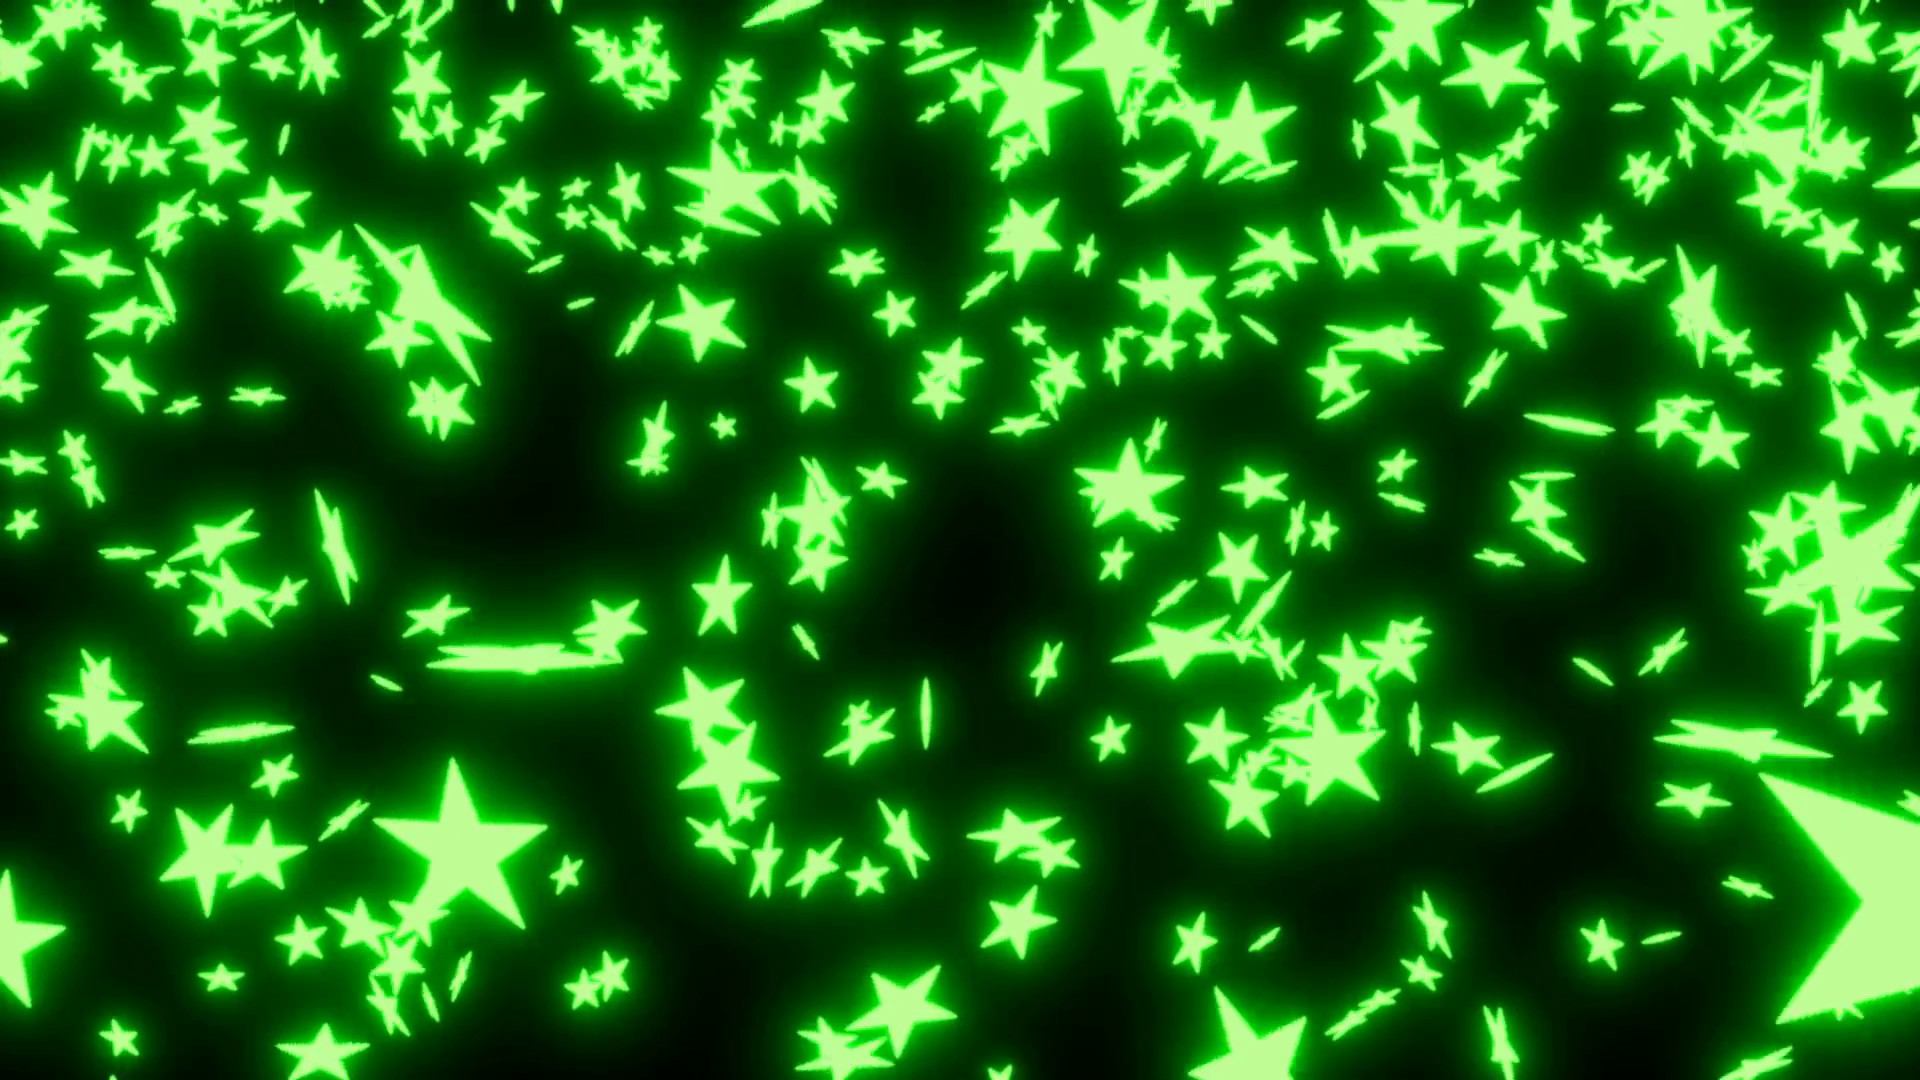 1920x1080 Subscription Library Animated falling neon green stars on black background.